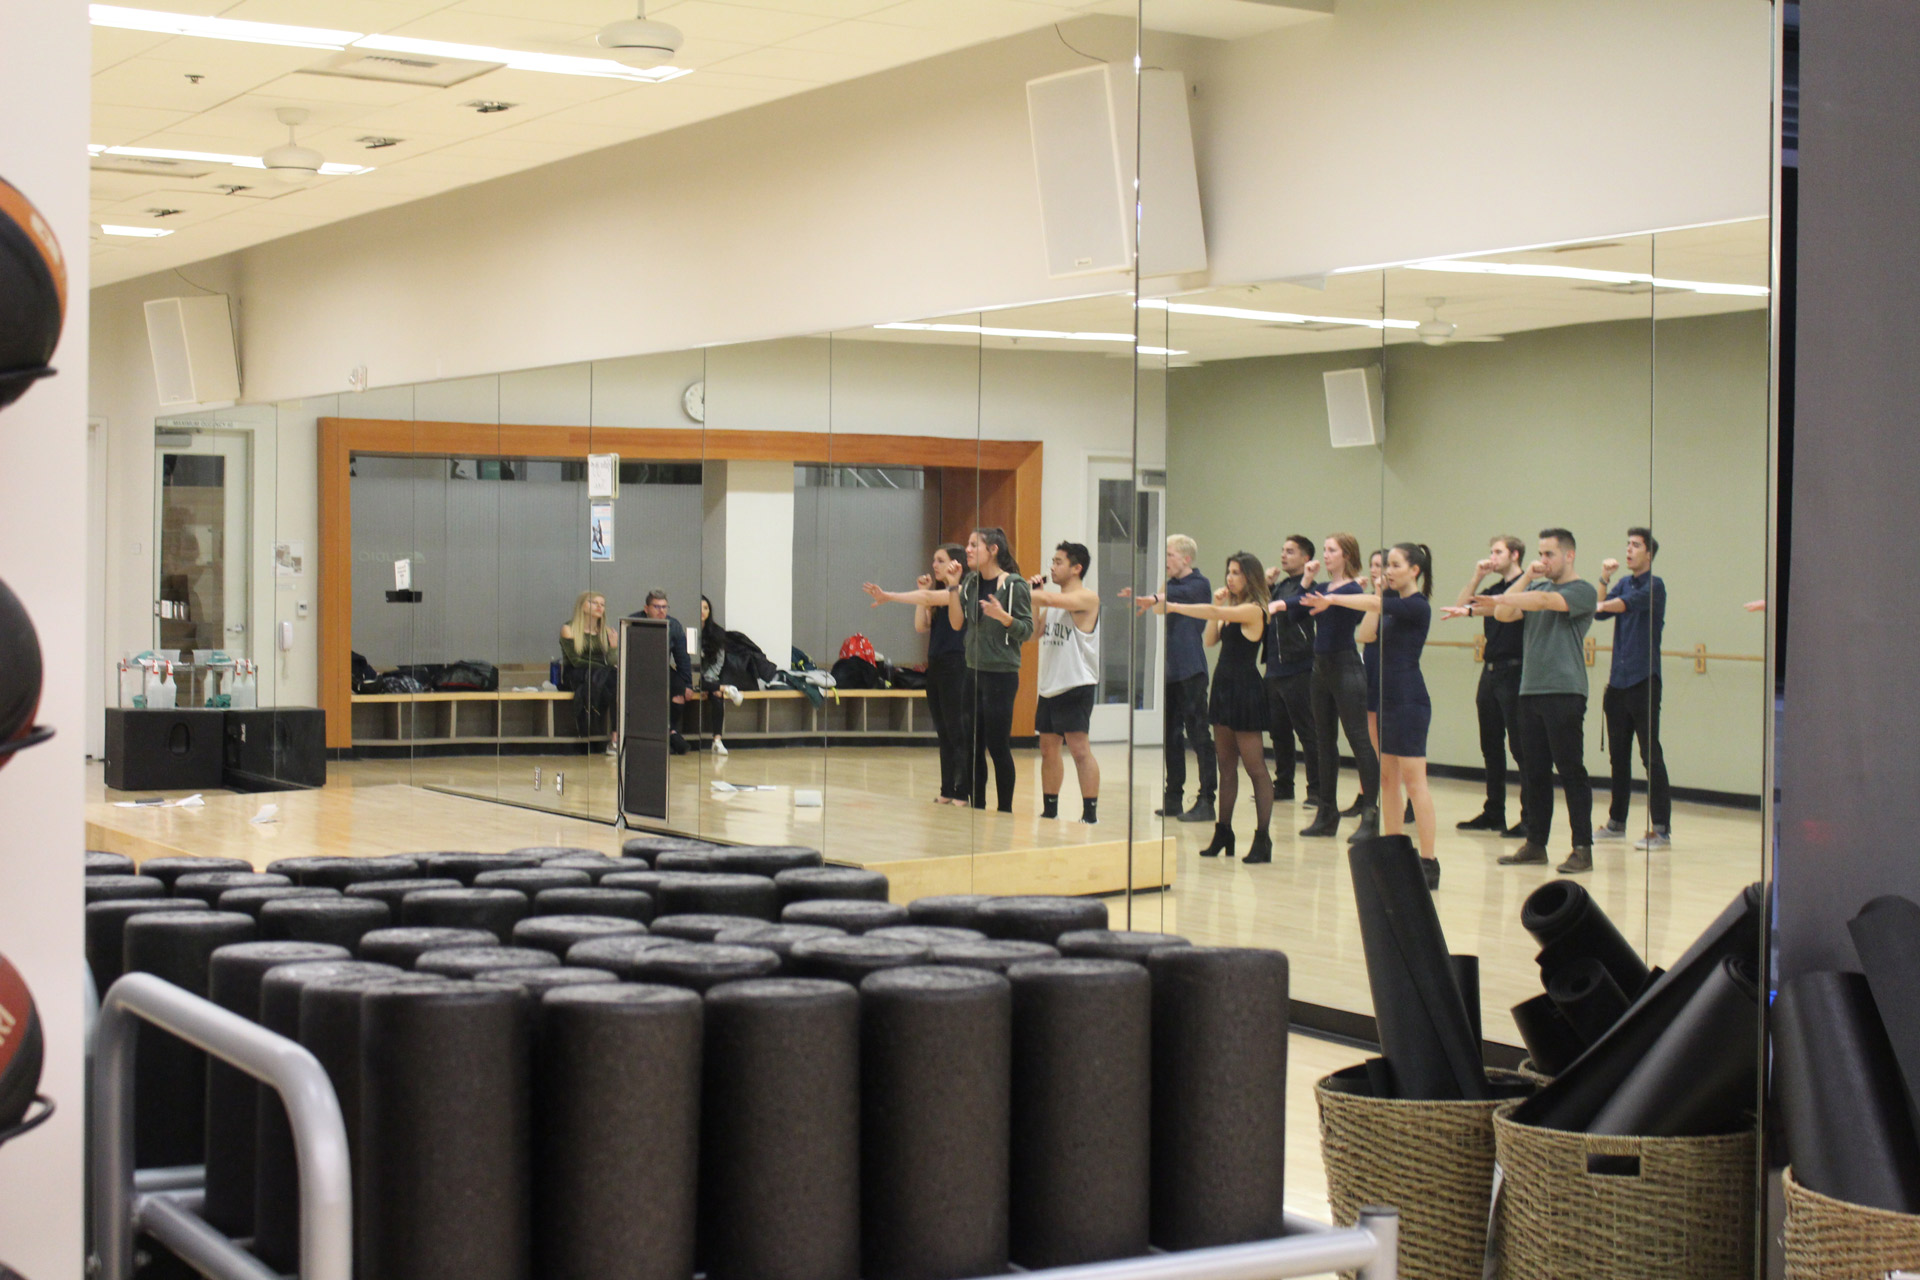 Vocal workout- In need of a mirrored rehearsal space, “Take It SLO” takes over a studio in the Cal Poly recreation center. San Luis Obispo, Calif., Monday, January 30, 2017.